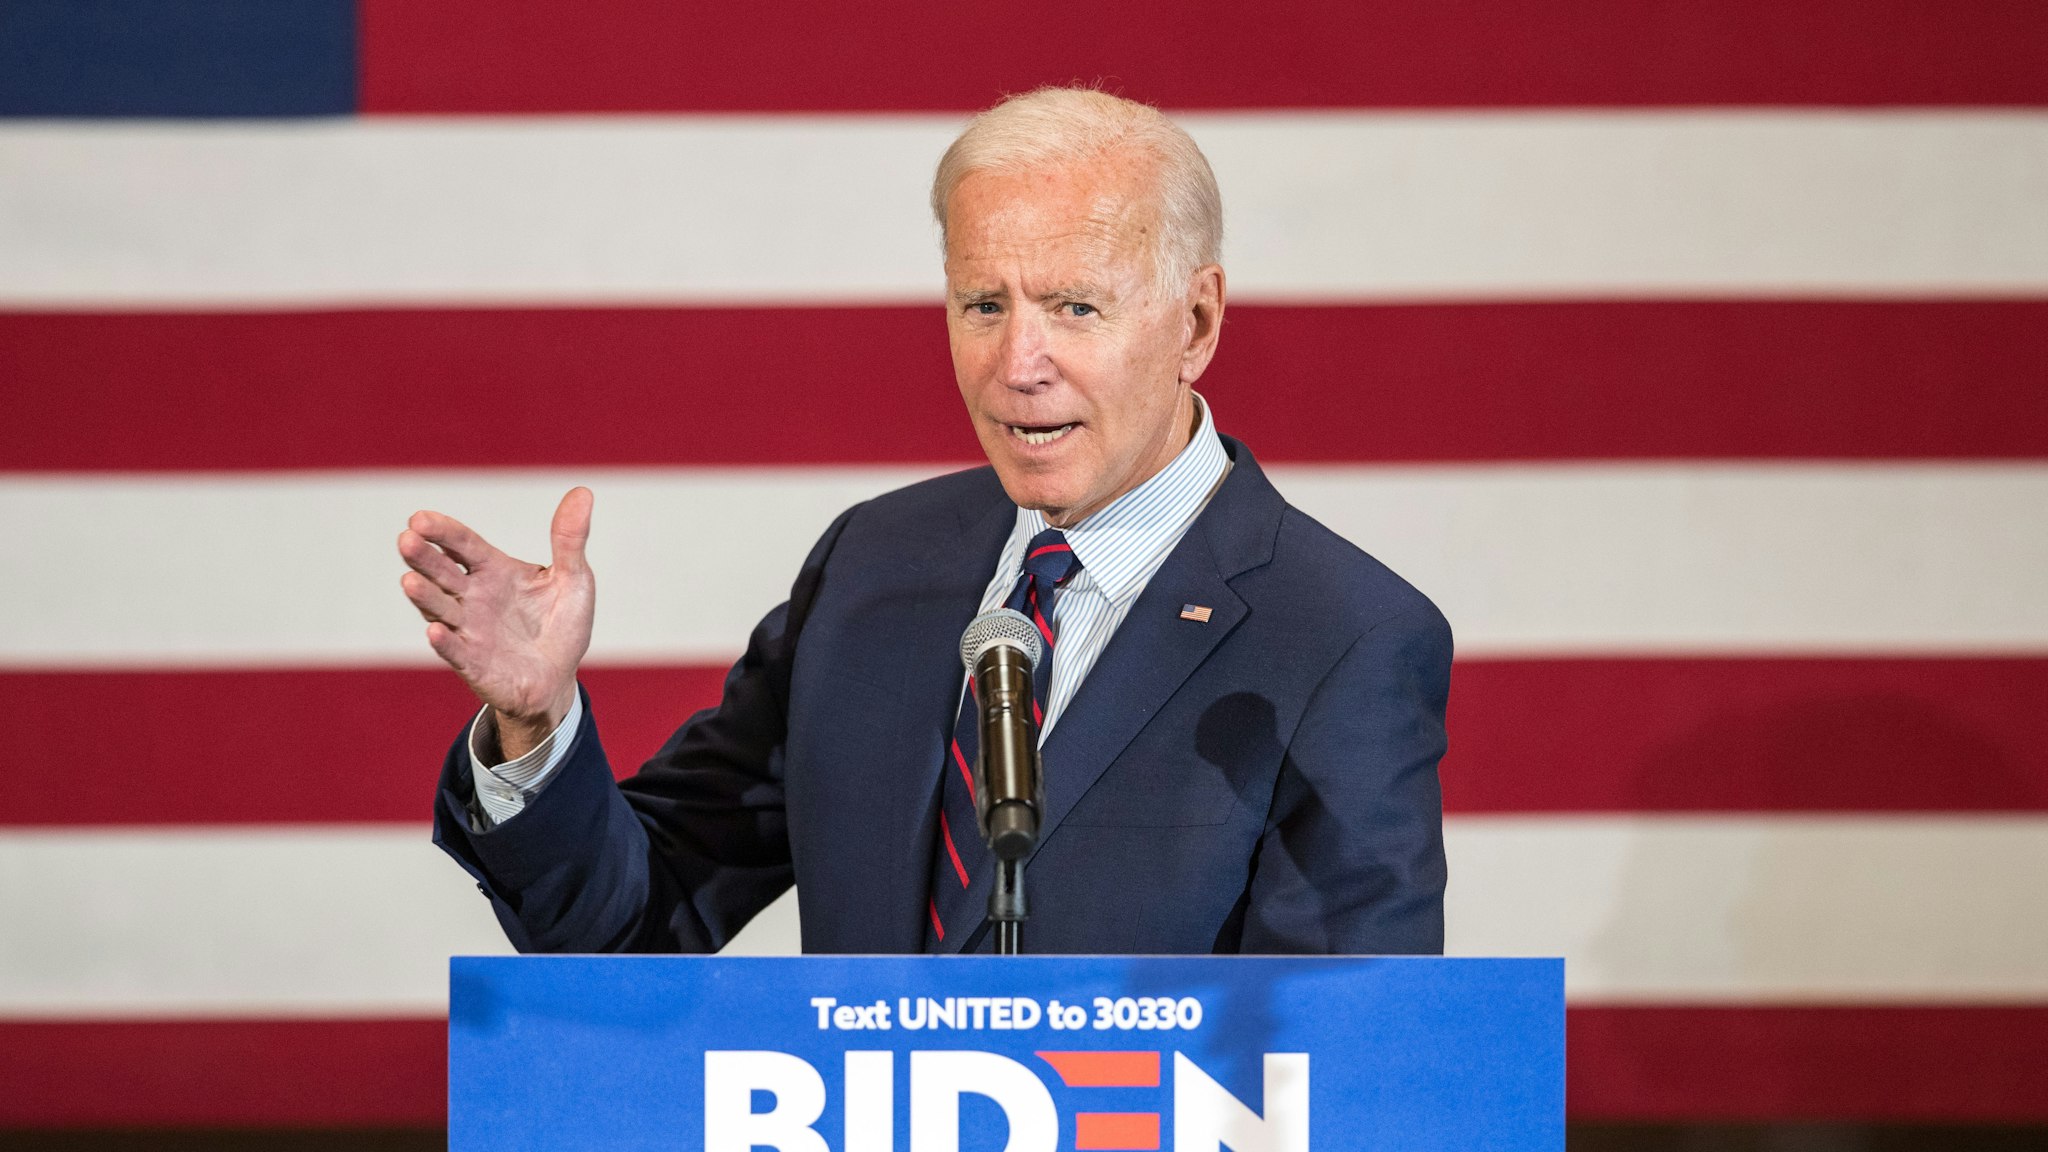 Democratic presidential candidate, former Vice President Joe Biden speaks during a campaign event on October 9, 2019 in Manchester, New Hampshire. For the first time, Biden has publicly called for President Trump to be impeached.